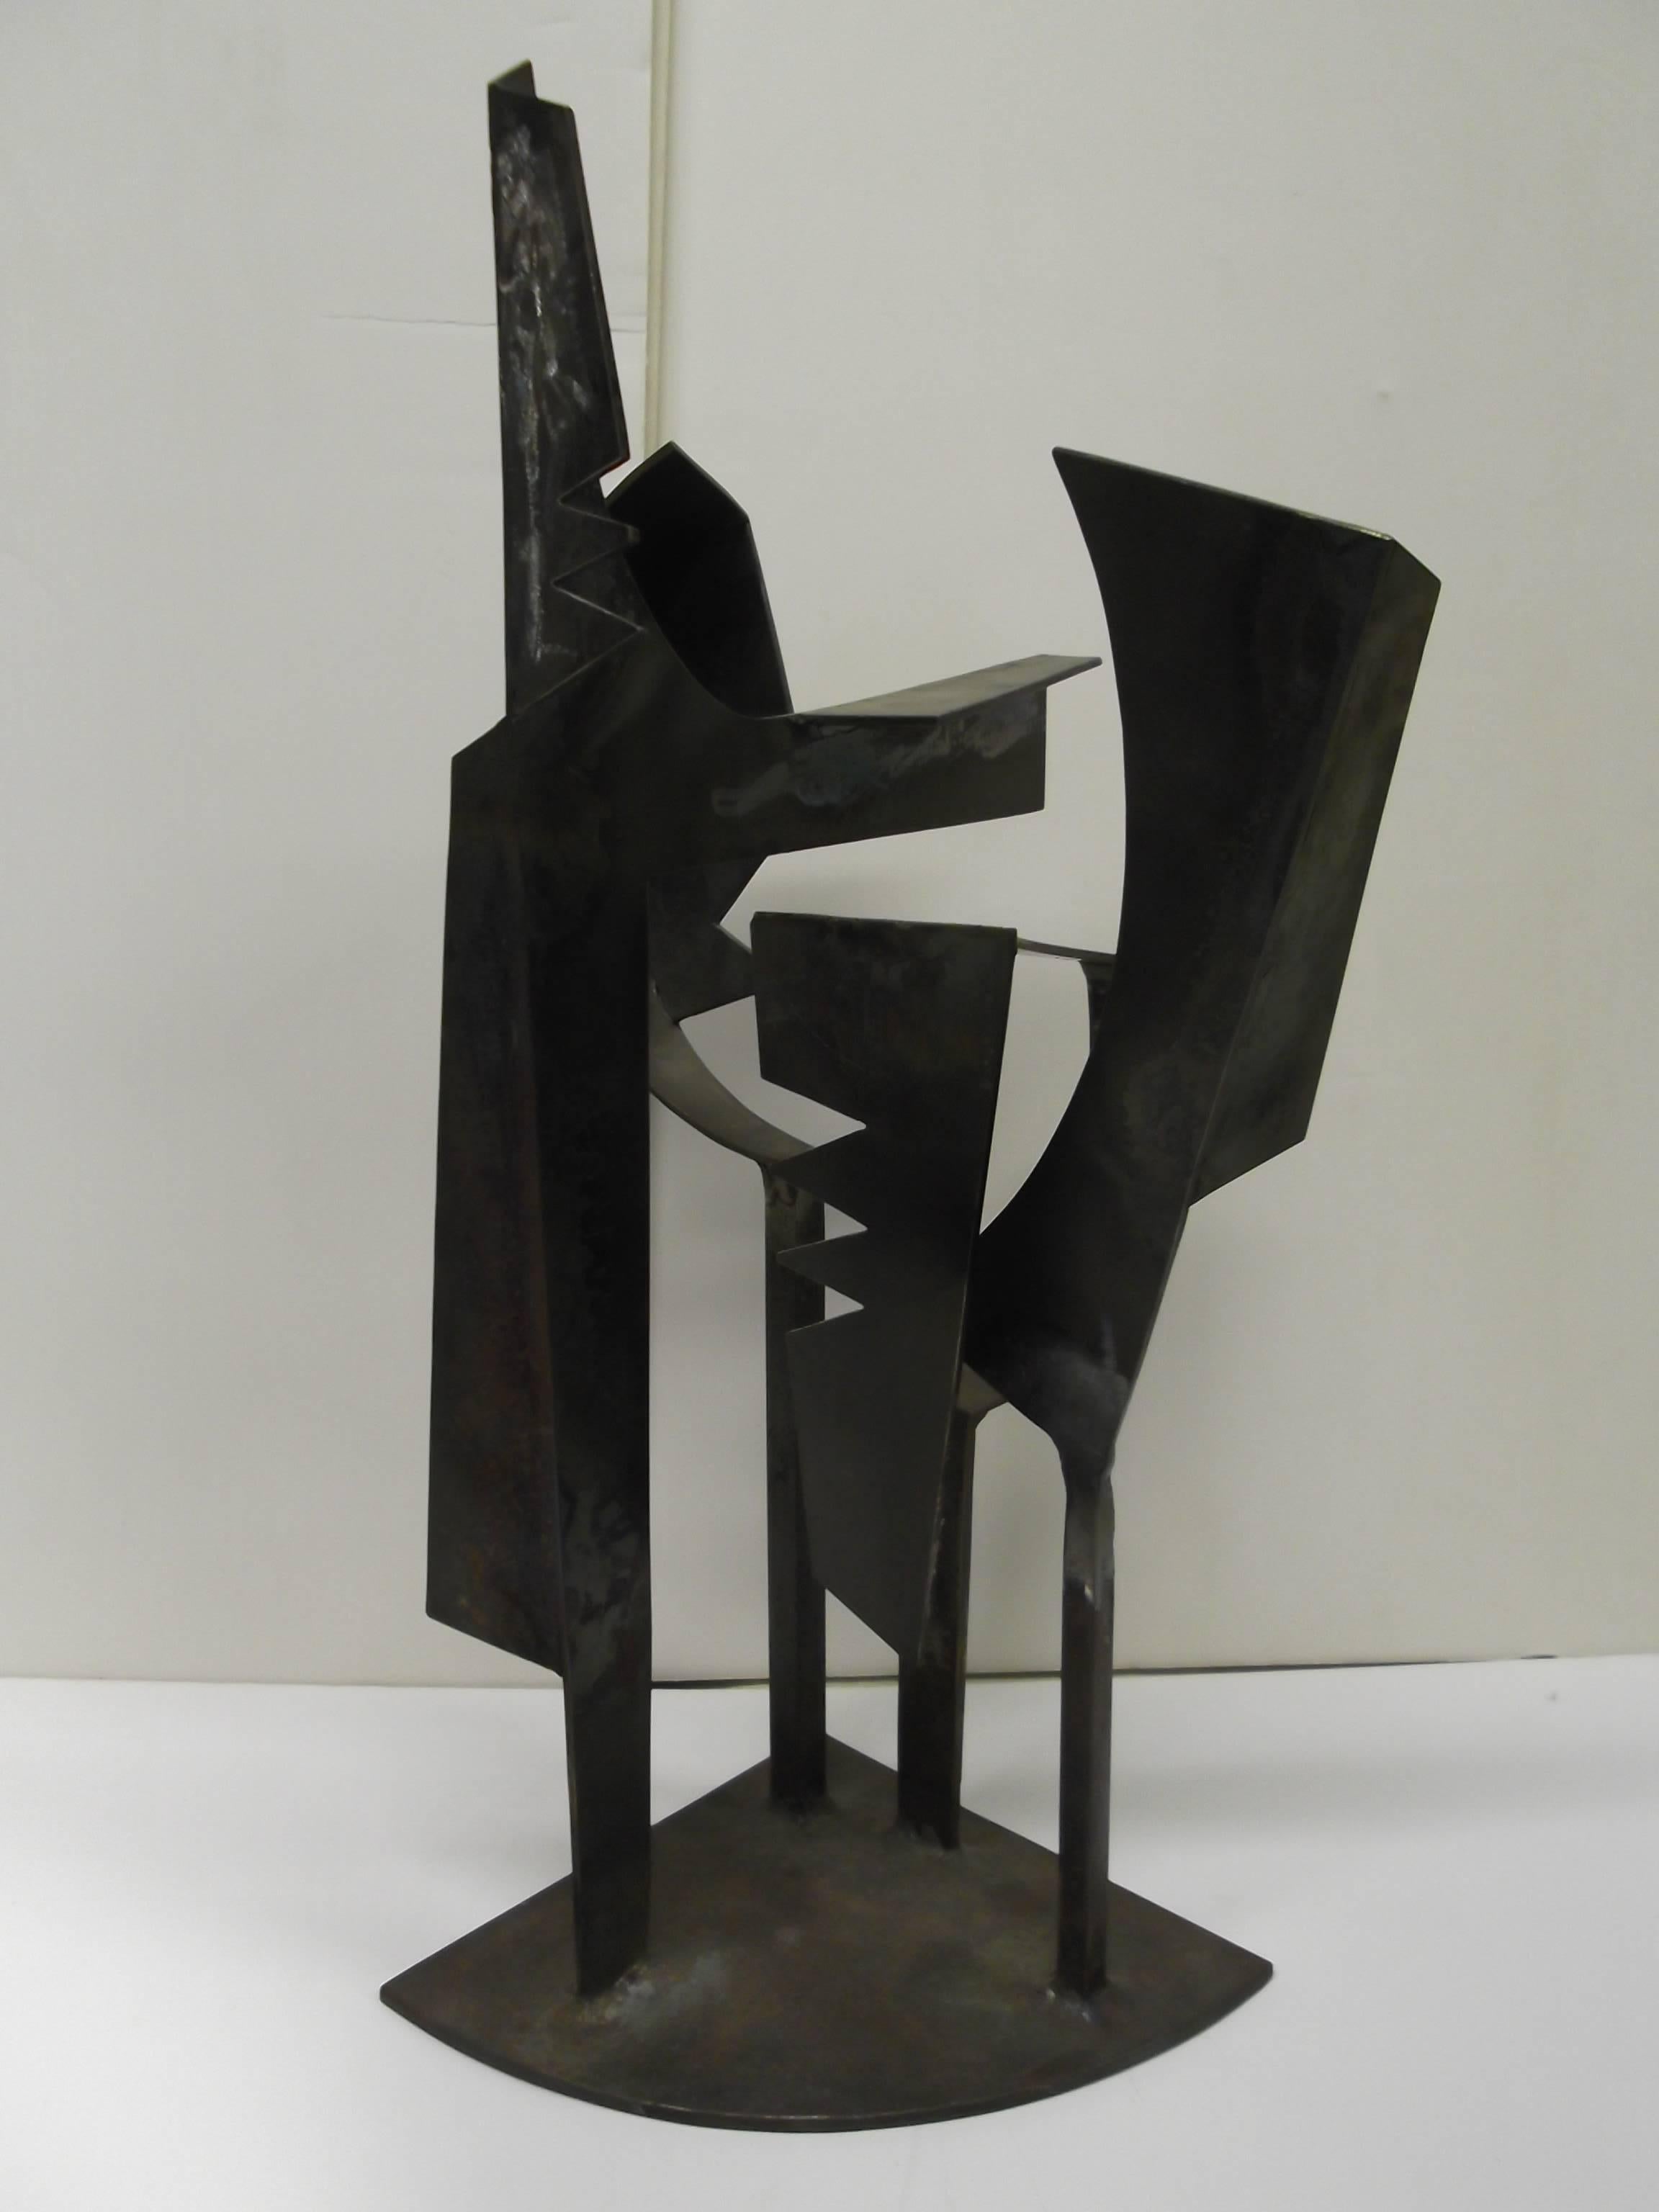 This is a fantastic version of what McVicker envisioned as a string quartet. There are four elements stemming from the base, each with the artists interpretation of musician with instrument. It is welded iron, standing 18